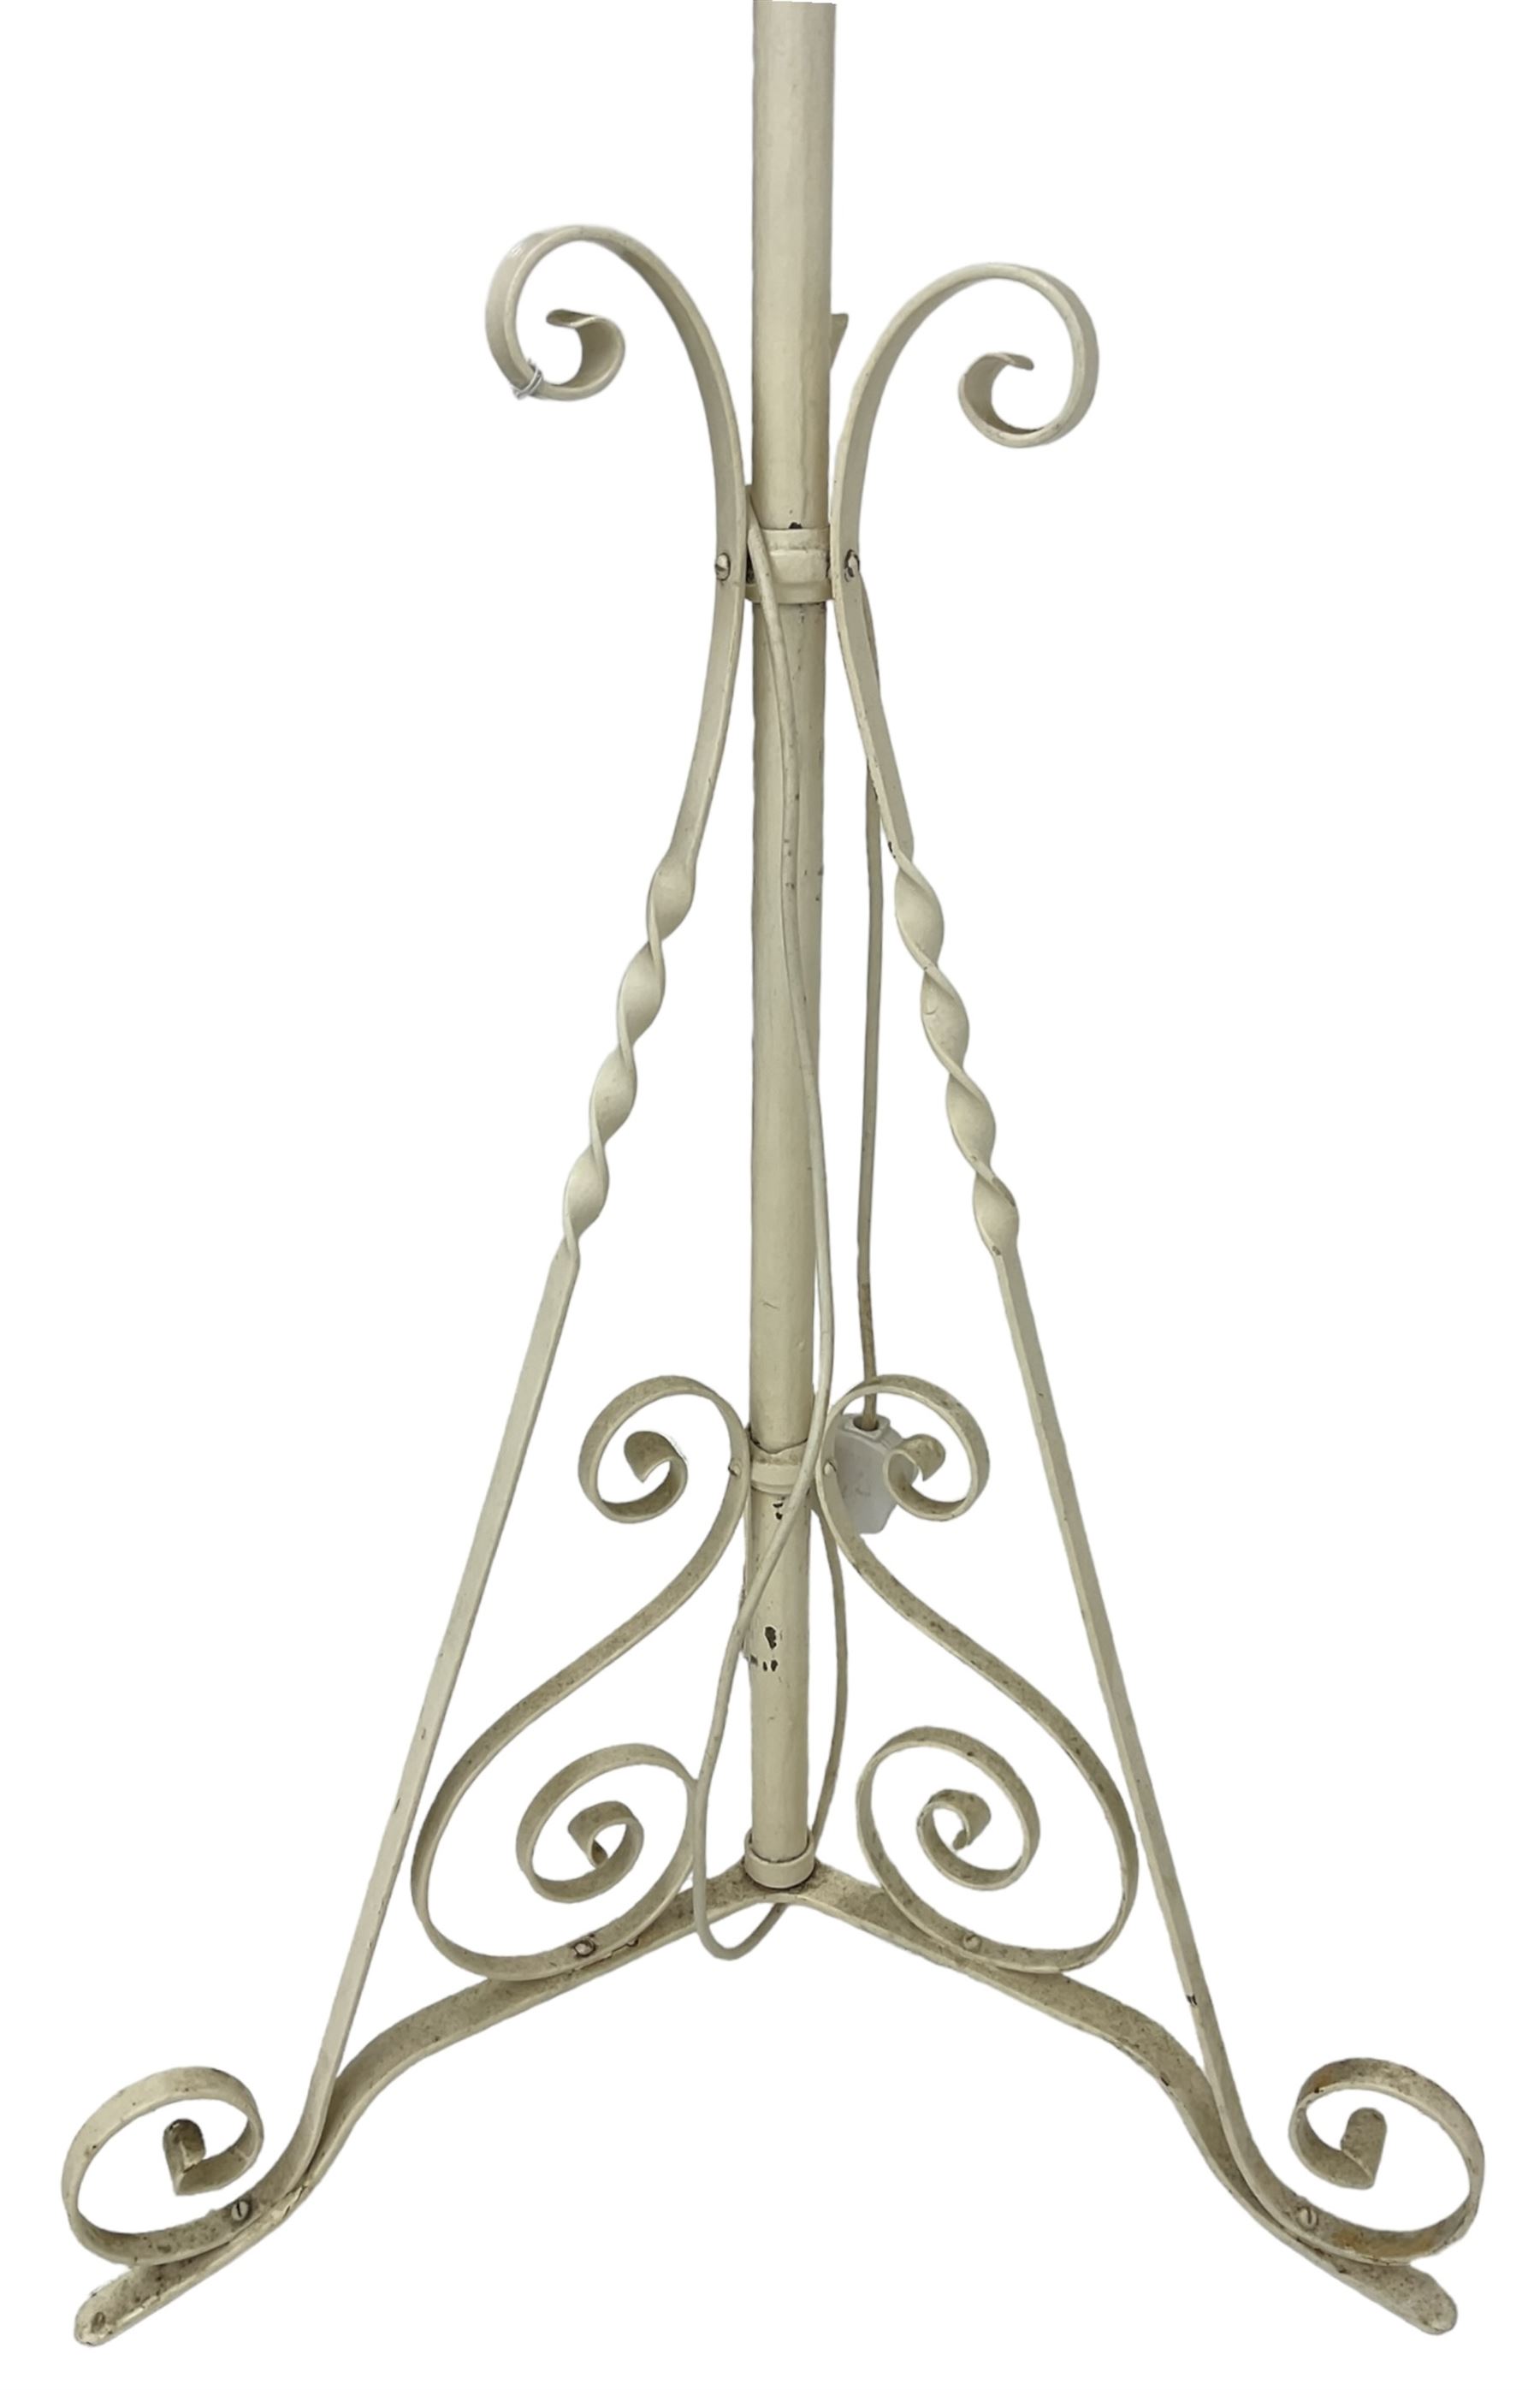 Cream painted wrought iron standard lamp with floral shade - Image 2 of 4